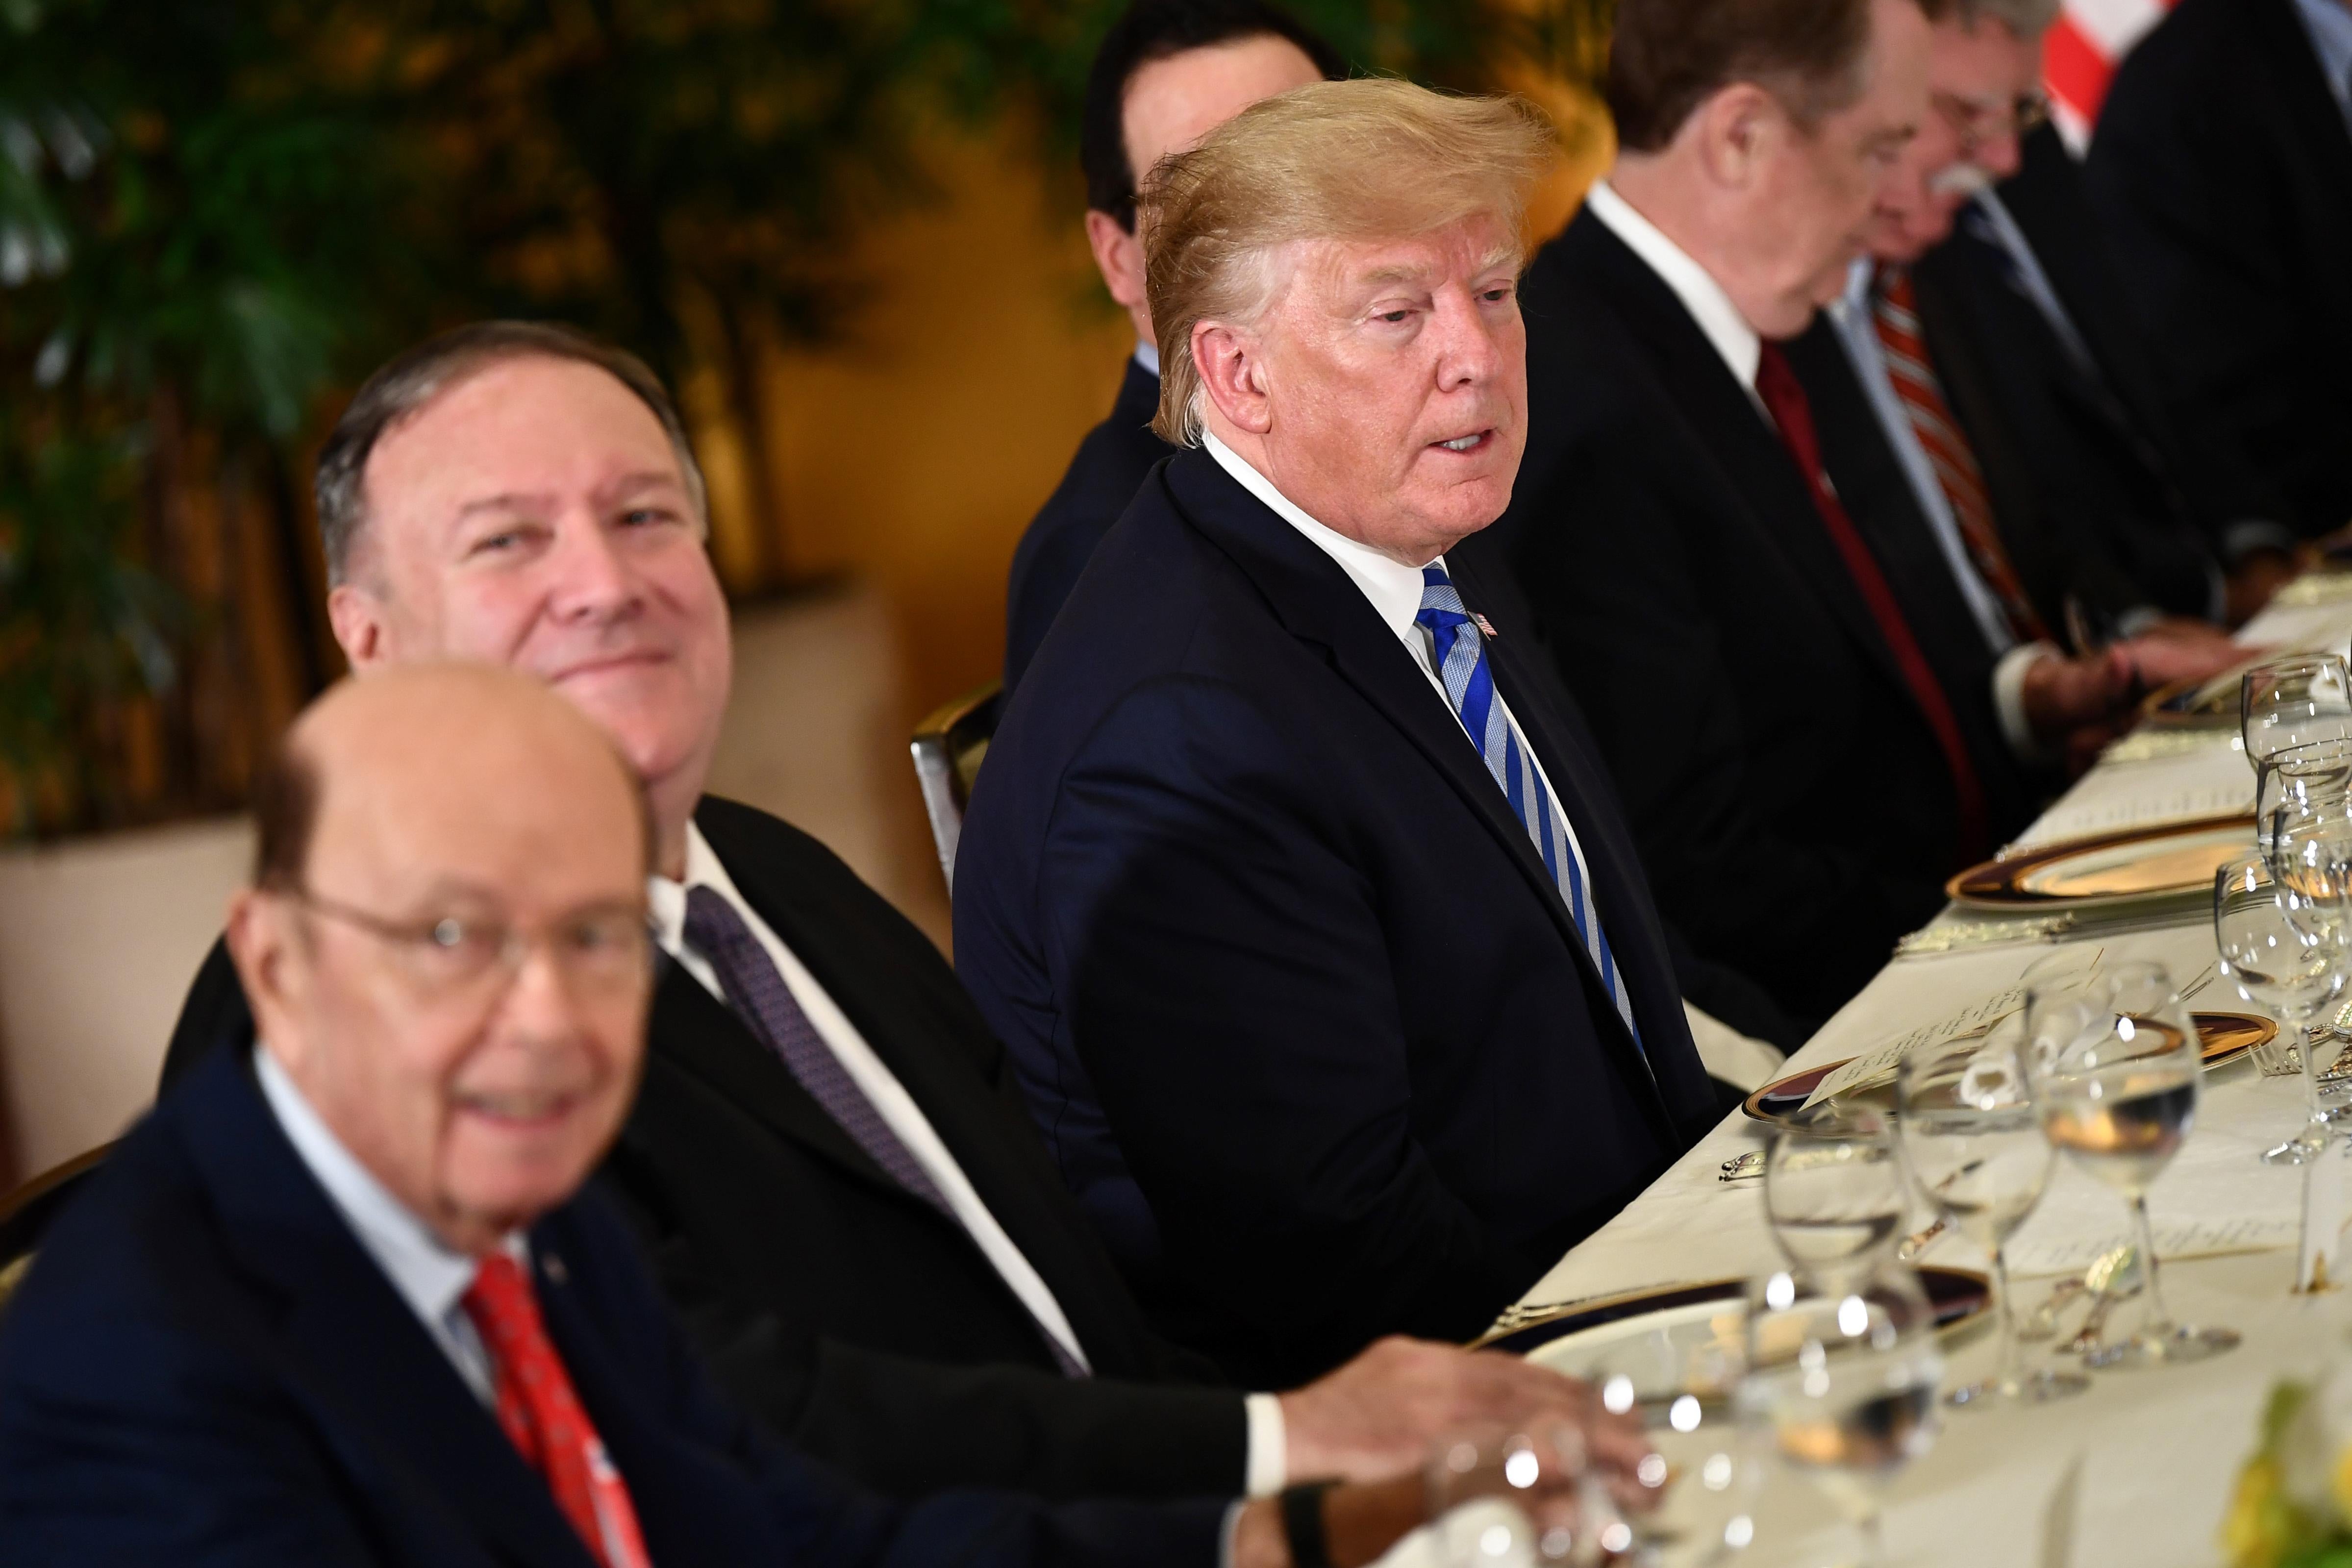 U.S. President Donald Trump sits with Secretary of State Mike Pompeo and Secretary of Commerce Wilbur Ross as they attend a dinner with Australia’s Prime Minister Scott Morrison in Osaka, Japan on Thursday.